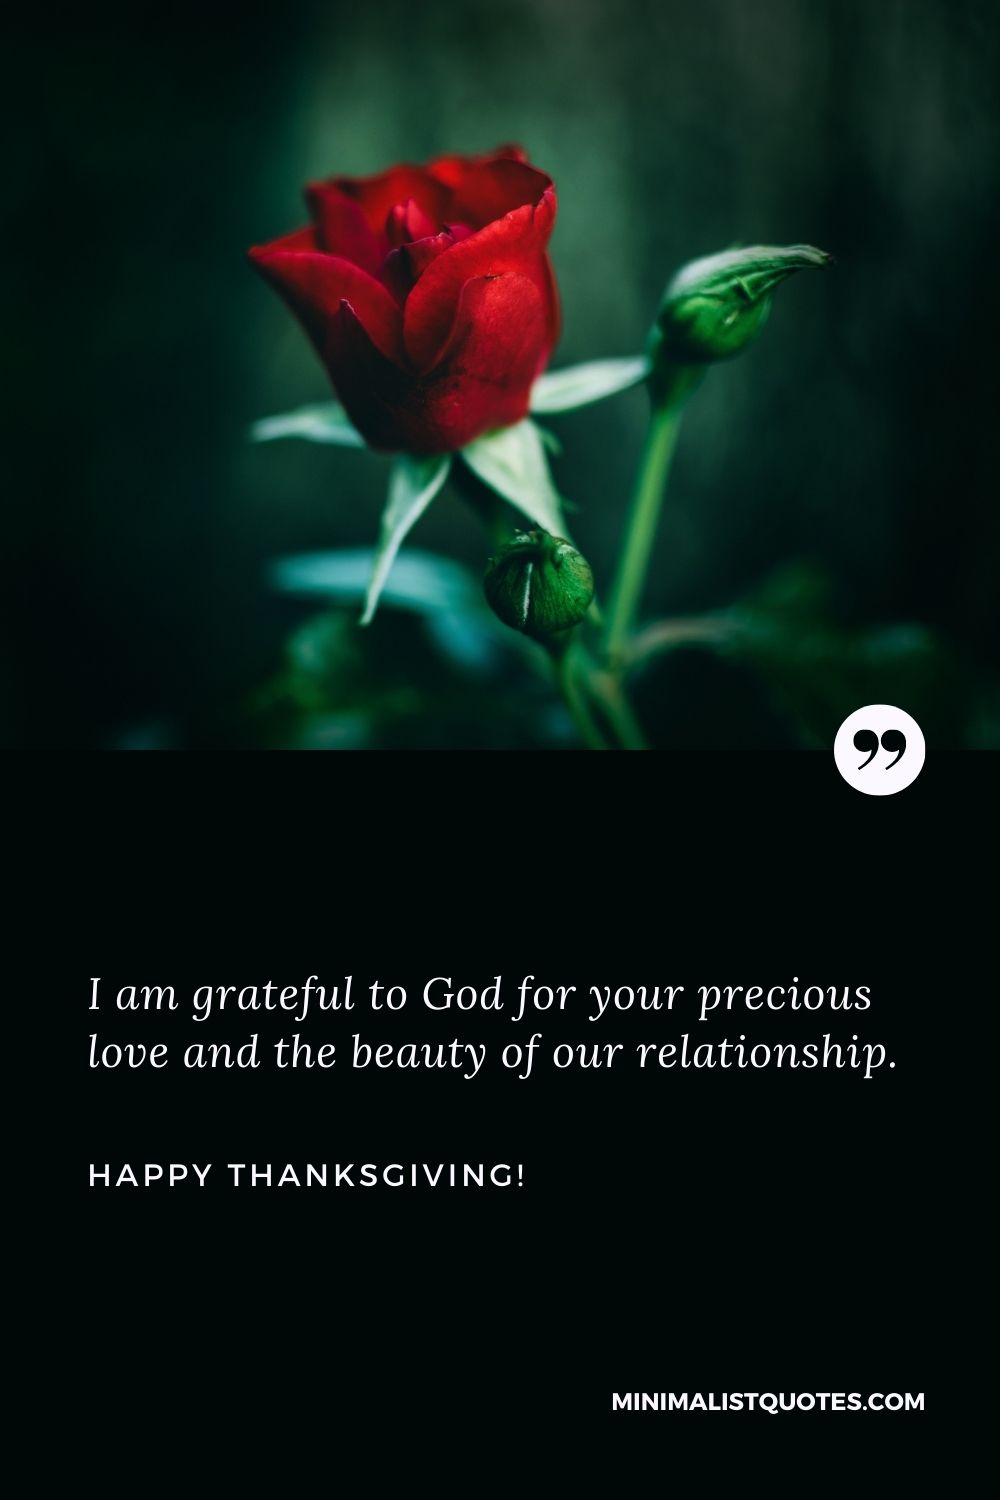 Happy Thanksgiving my love: I am grateful to God for your precious love and the beauty of our relationship. Happy Thanksgiving!